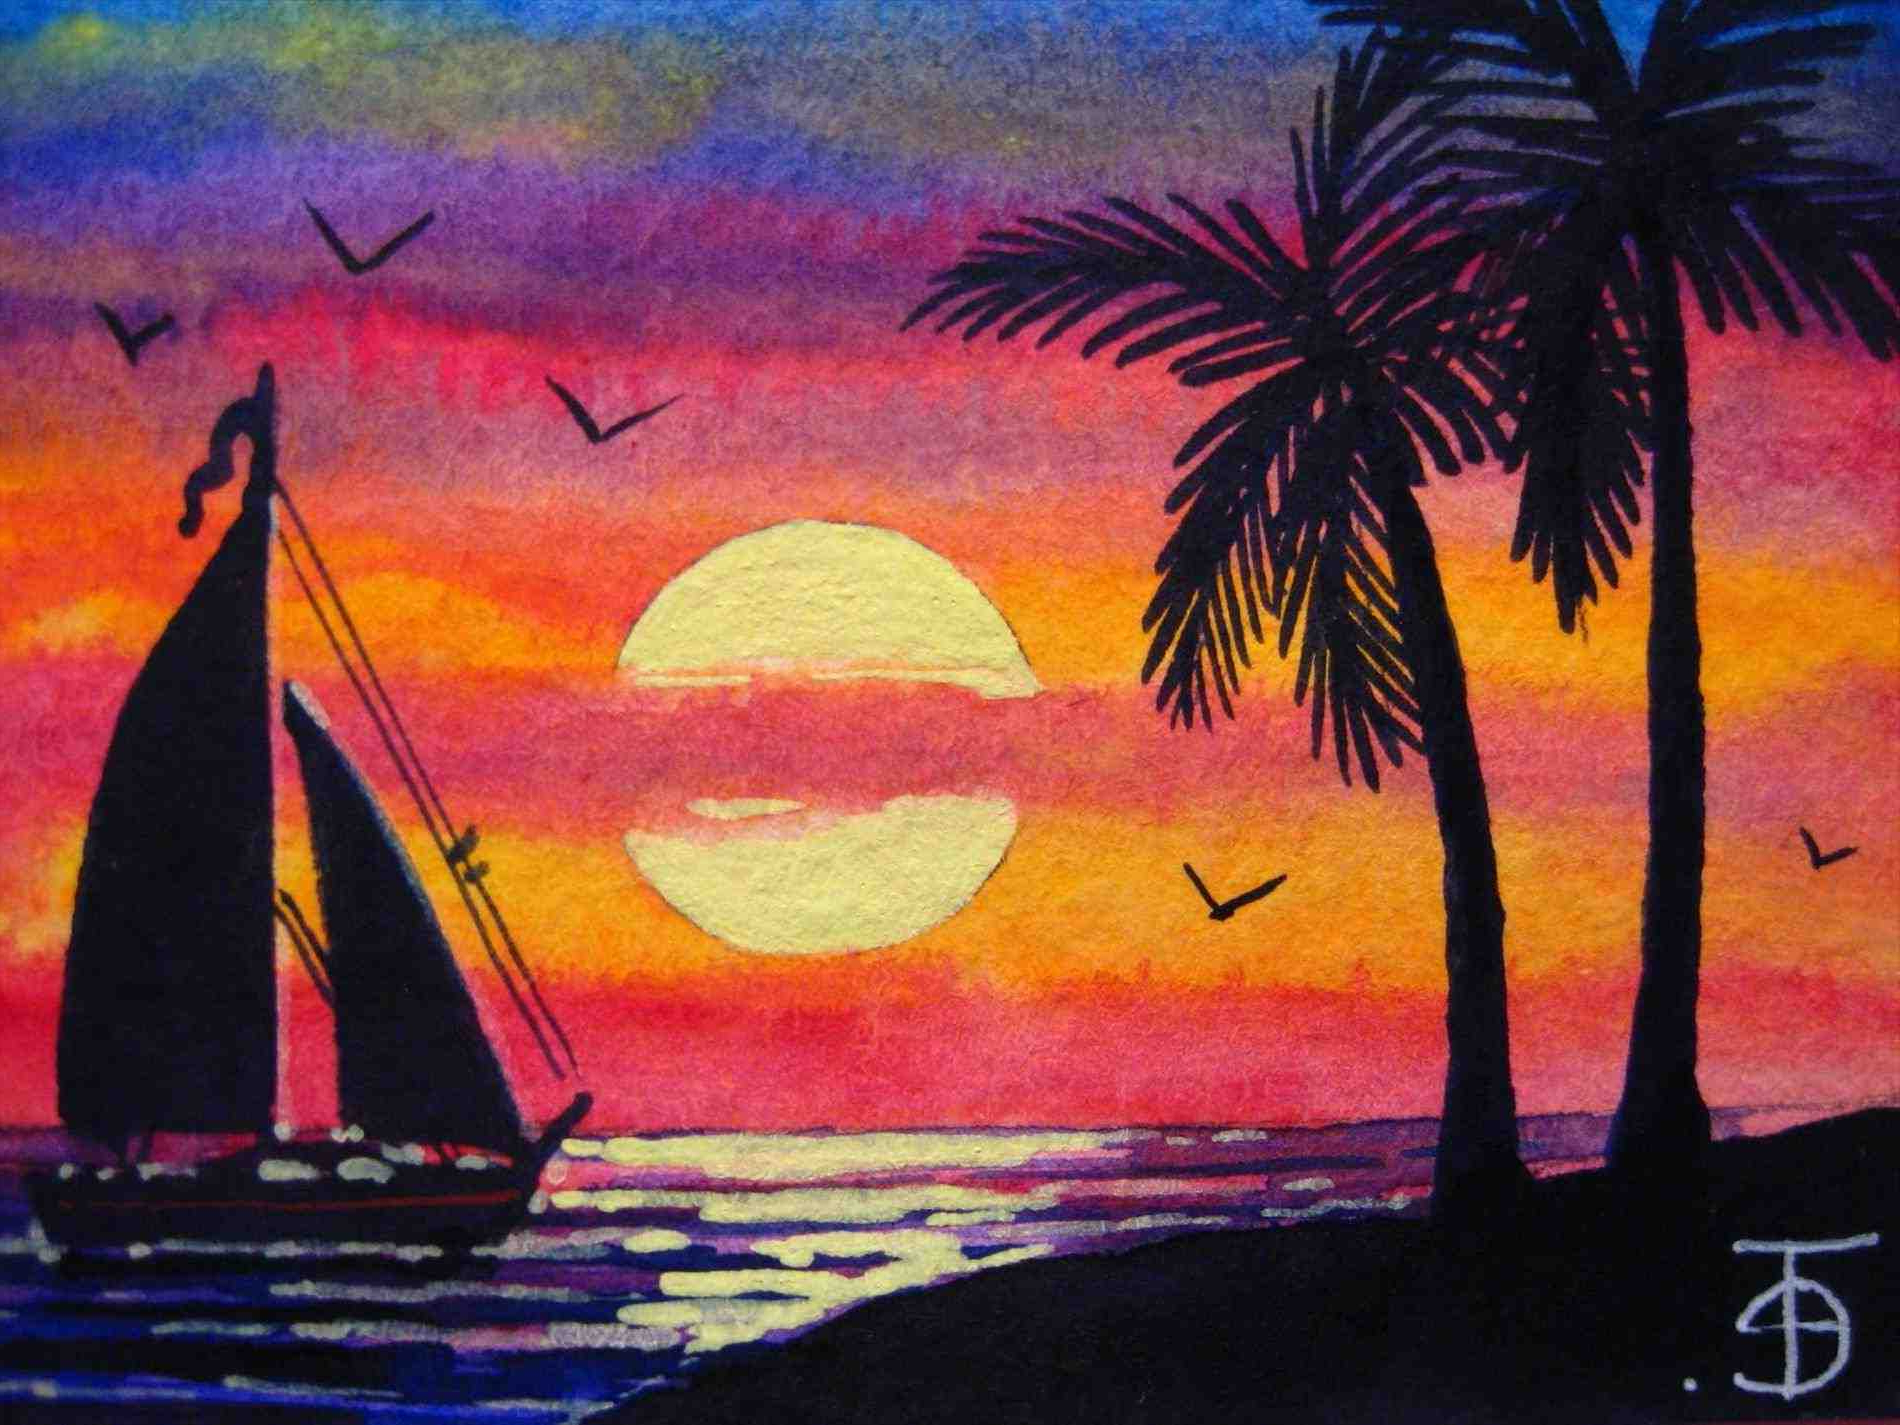 An easy nature night view scenery painting || Sunset Acrylic painting ||  Sun in the dark scenery || - YouTube